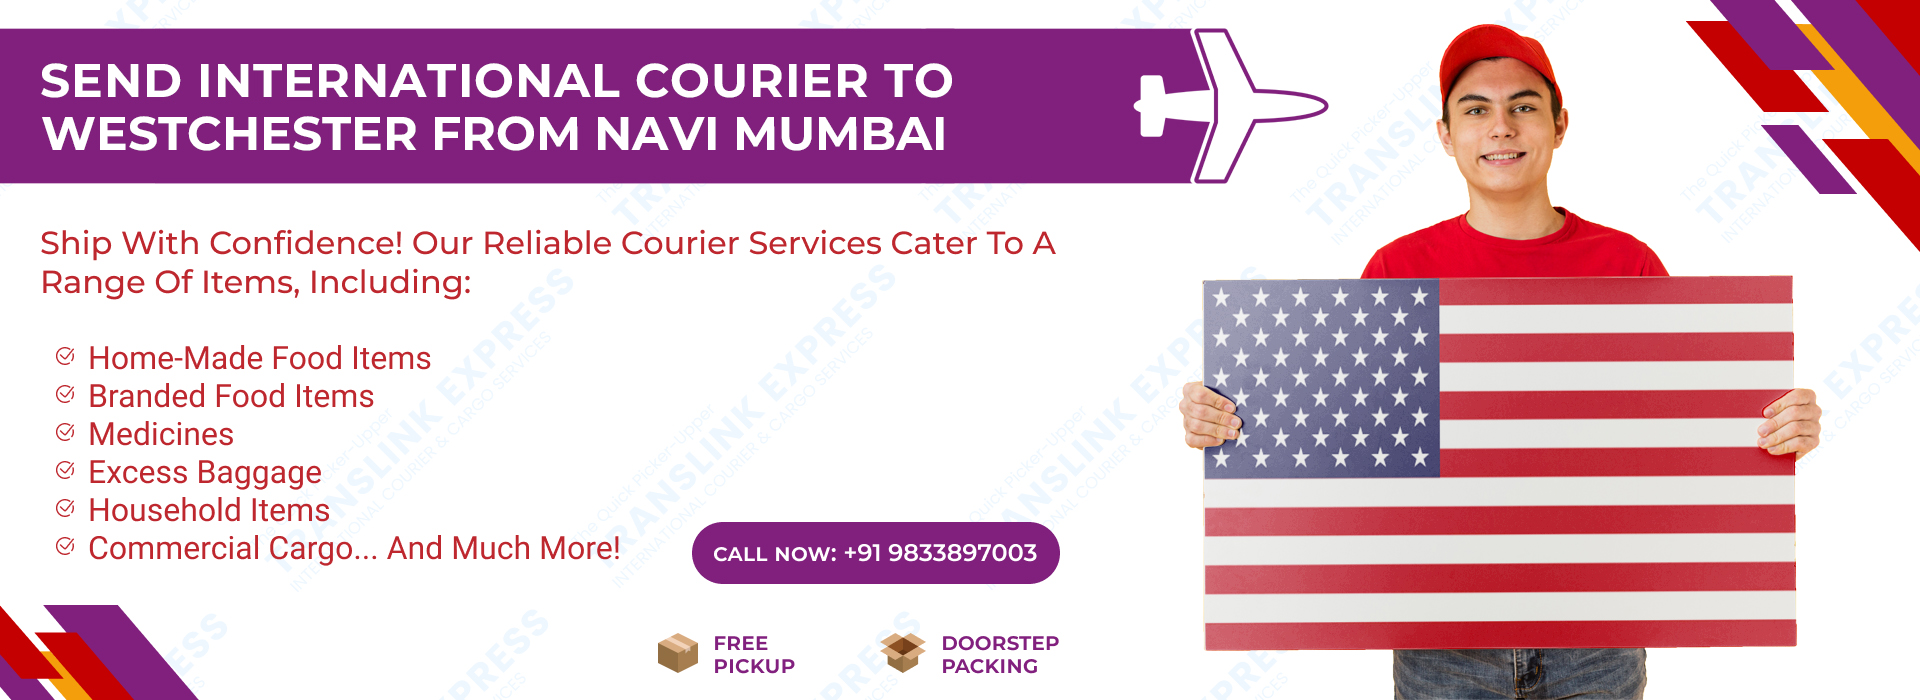 Courier to Westchester From Navi Mumbai